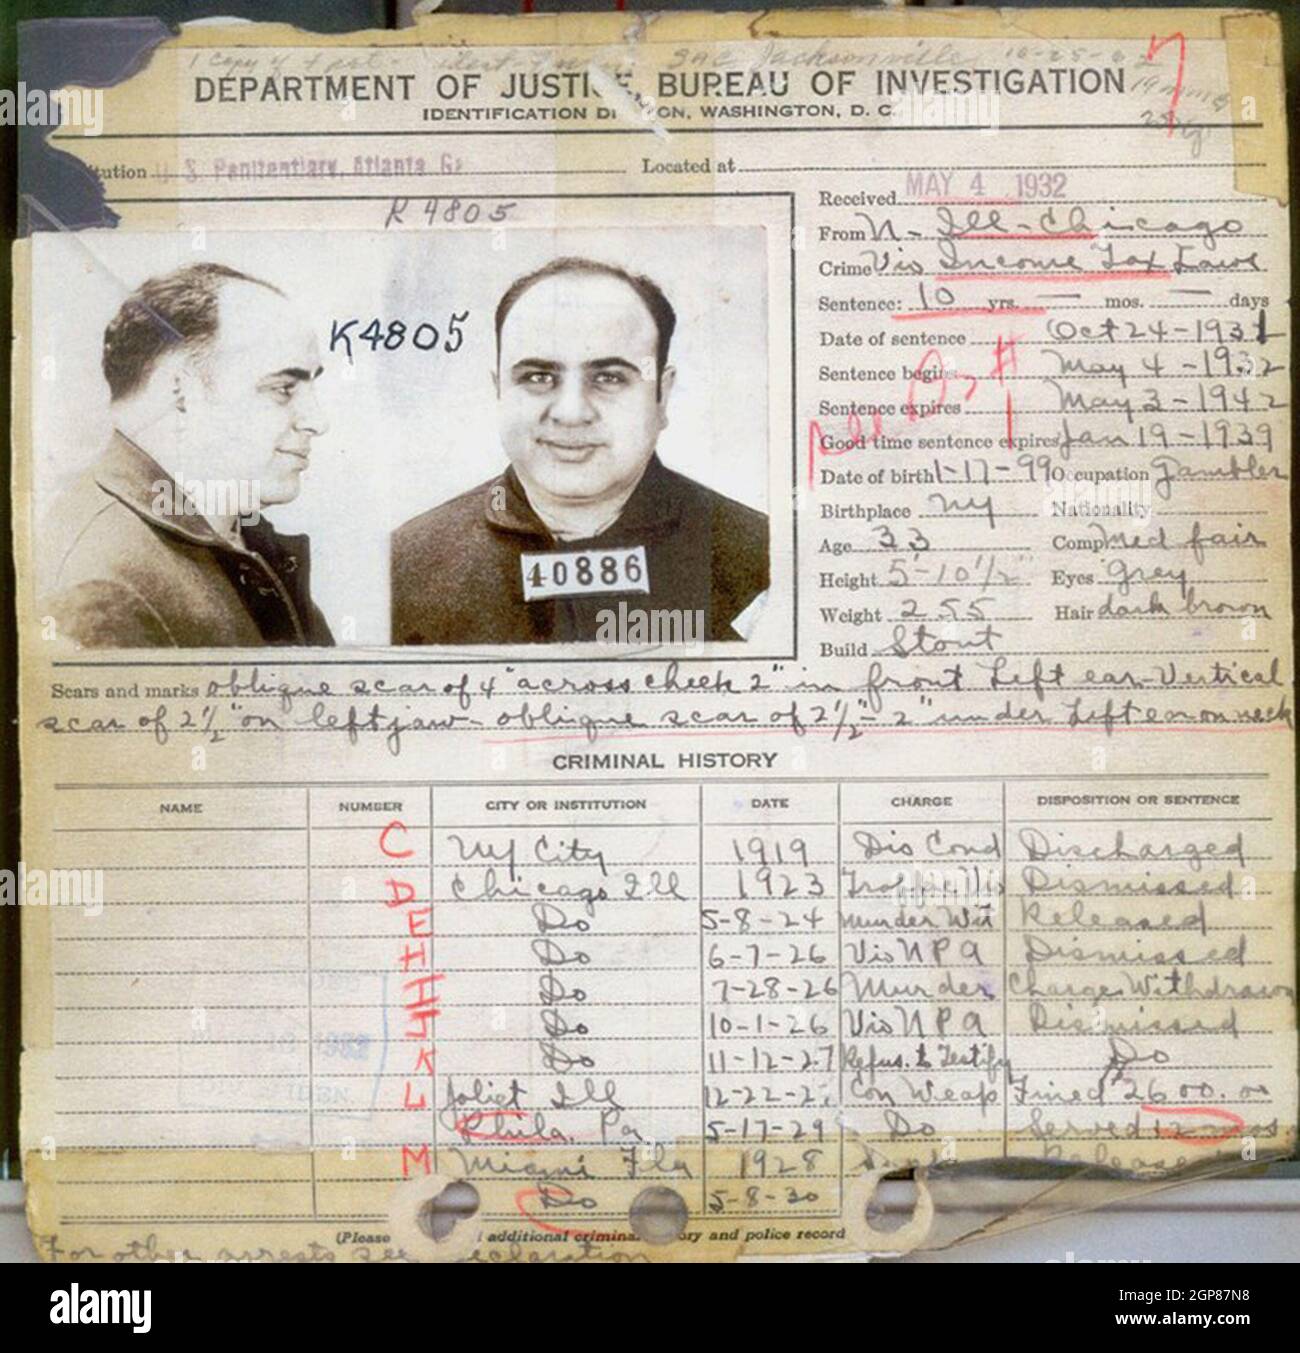 Al Capone's FBI criminal record in 1932, showing most of his criminal charges were dismissed. Alphonse Gabriel Capone (1899 – 1947) American gangster attained notoriety during the Prohibition era as the co-founder and boss of the Chicago Outfit. His seven-year reign as a crime boss ended when he went to prison at the age of 33. Stock Photo